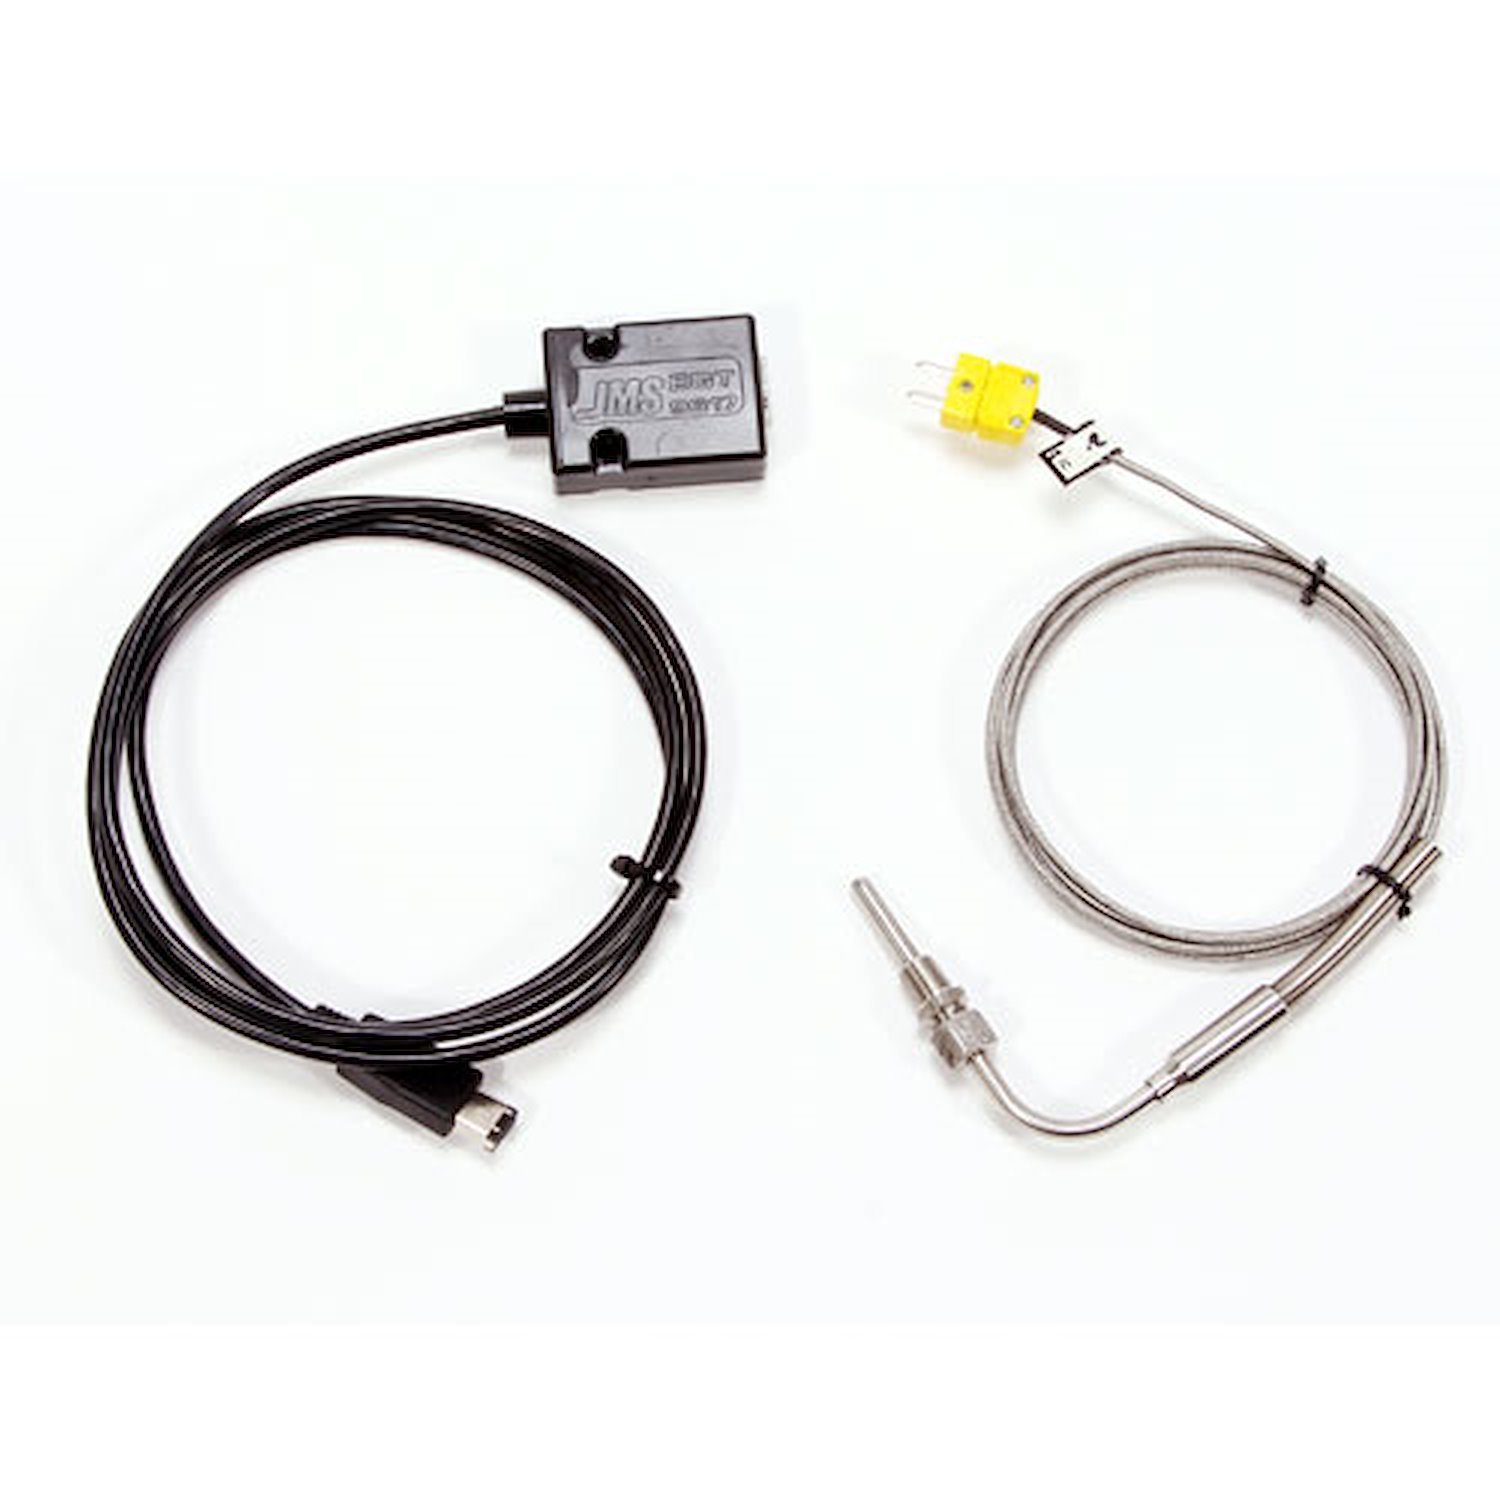 Exhaust Gas Temperature Sensor Kit Fits SCT Programmers & Monitors w/ Firewire Analog Connections